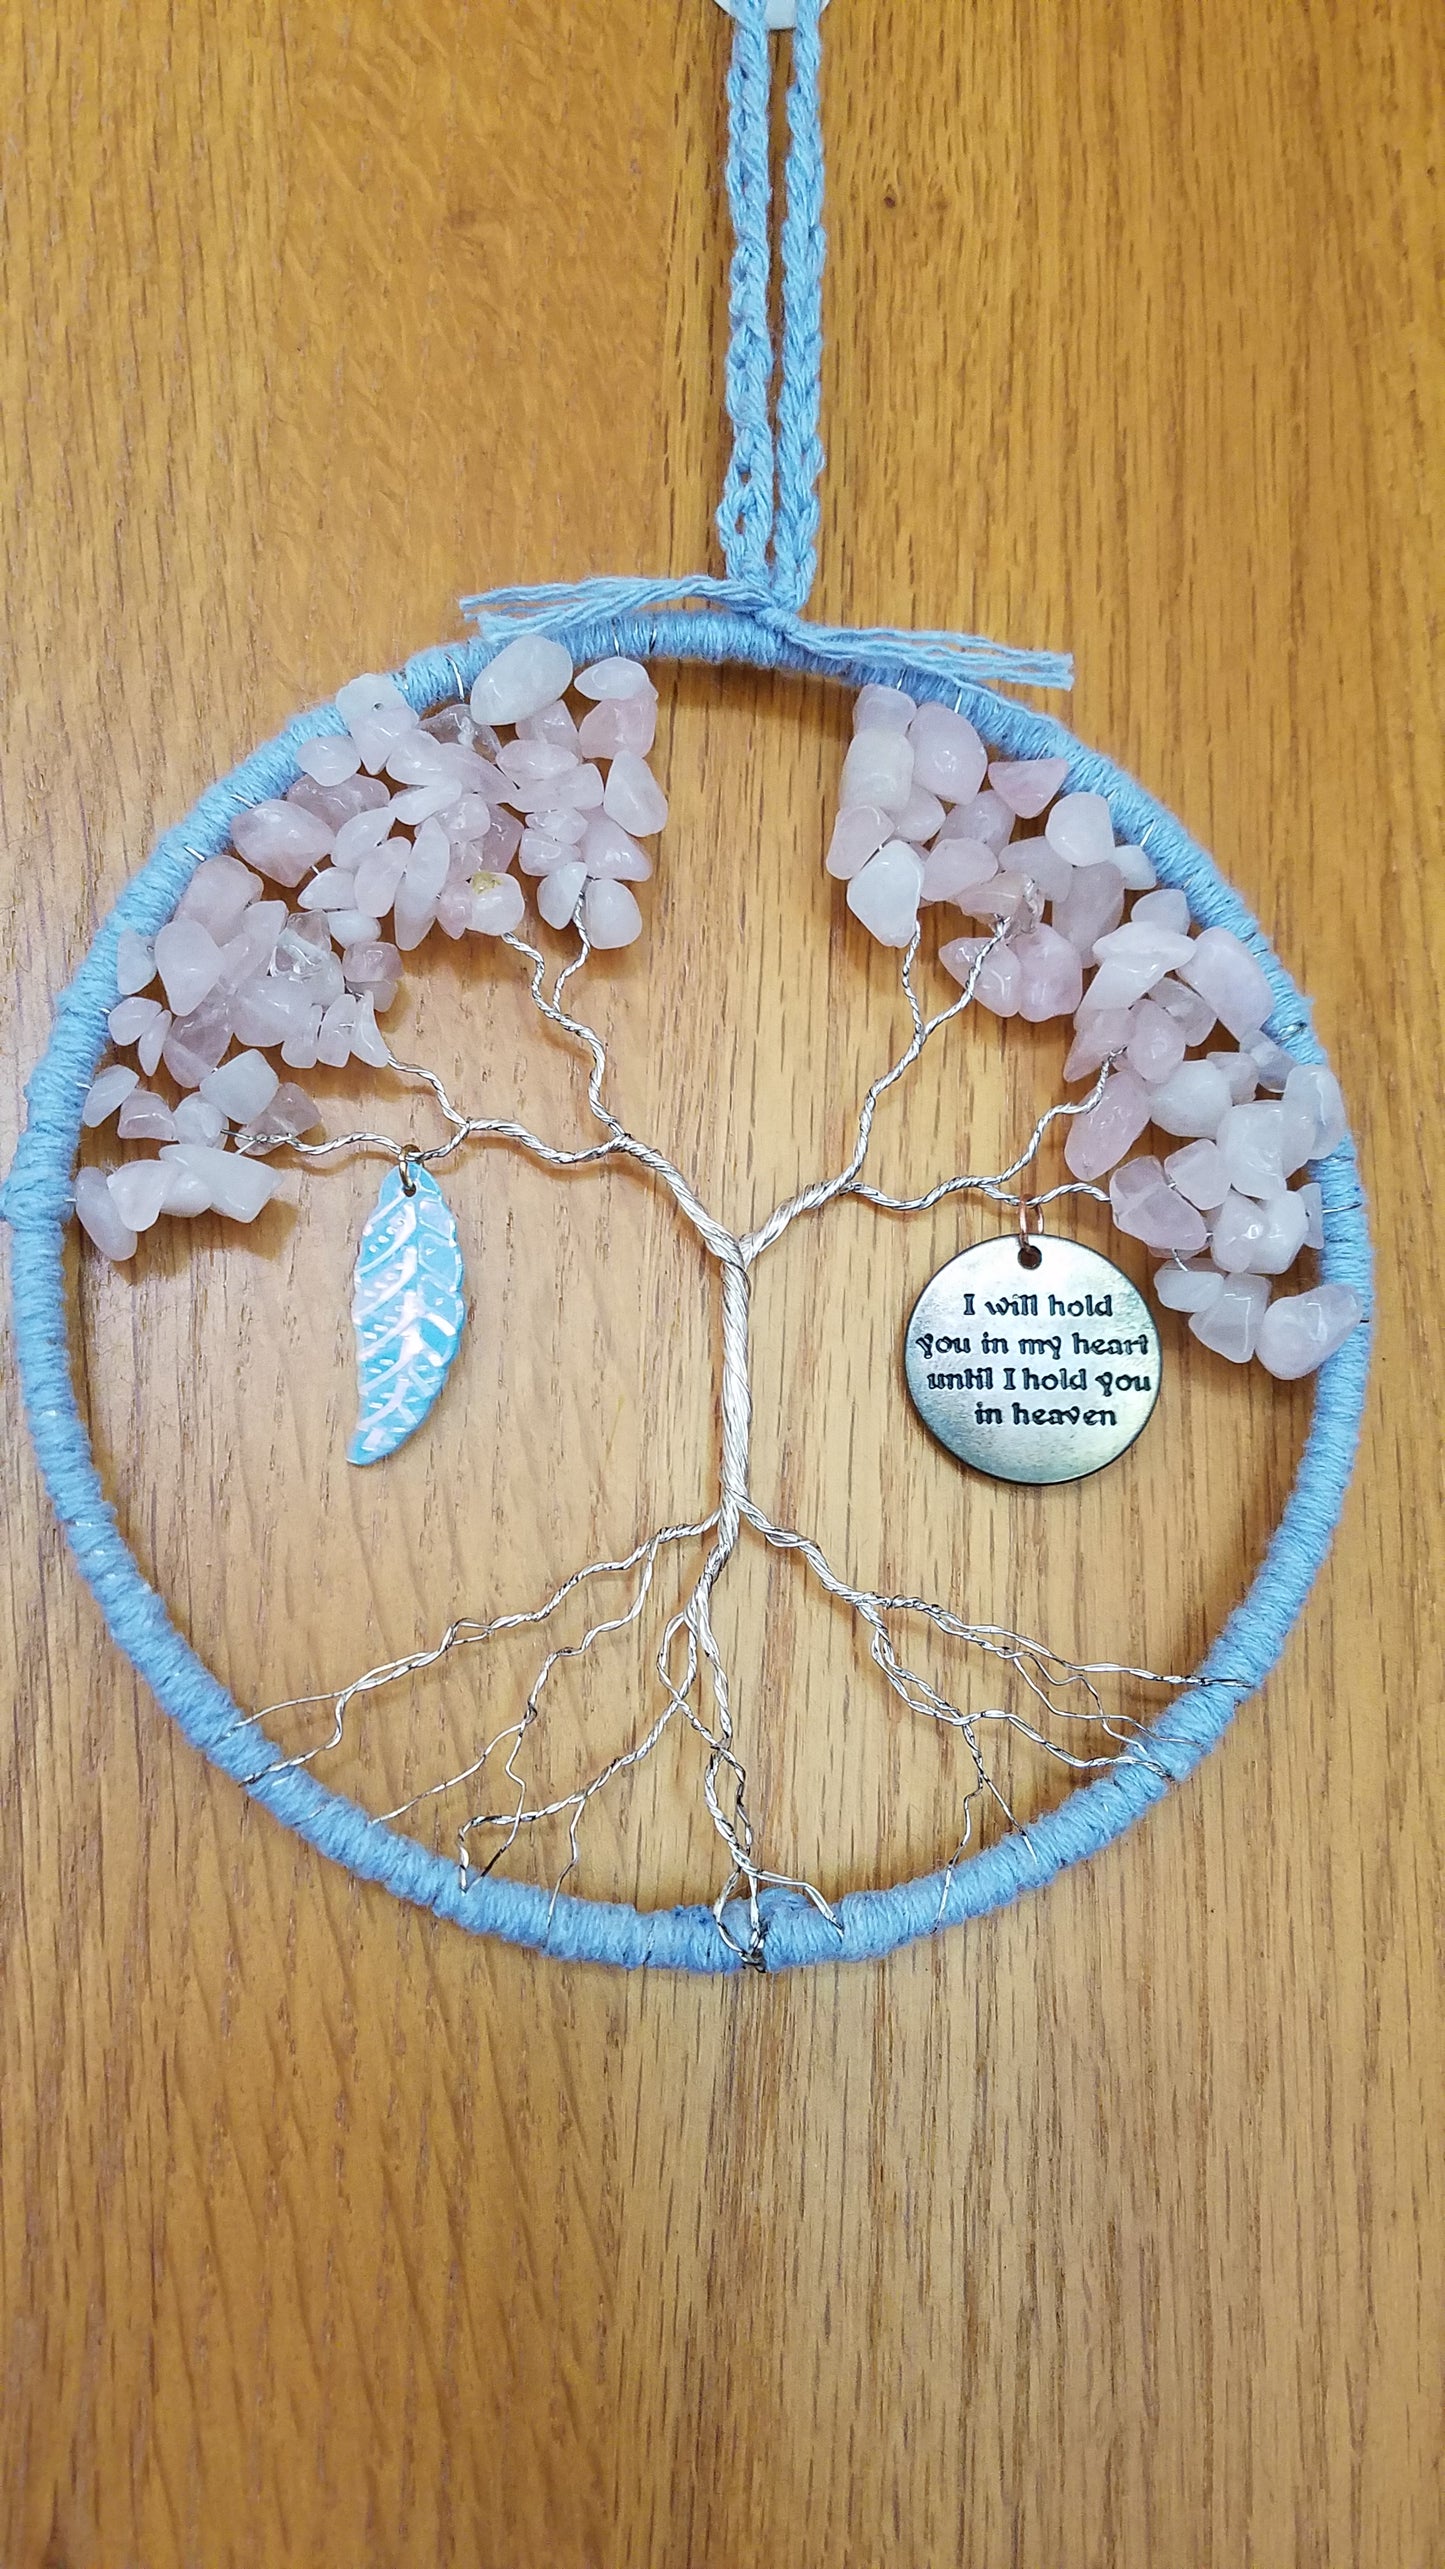 Child Loss Remembrance Tree of Life Dream Catcher In Memory of a Lost Child